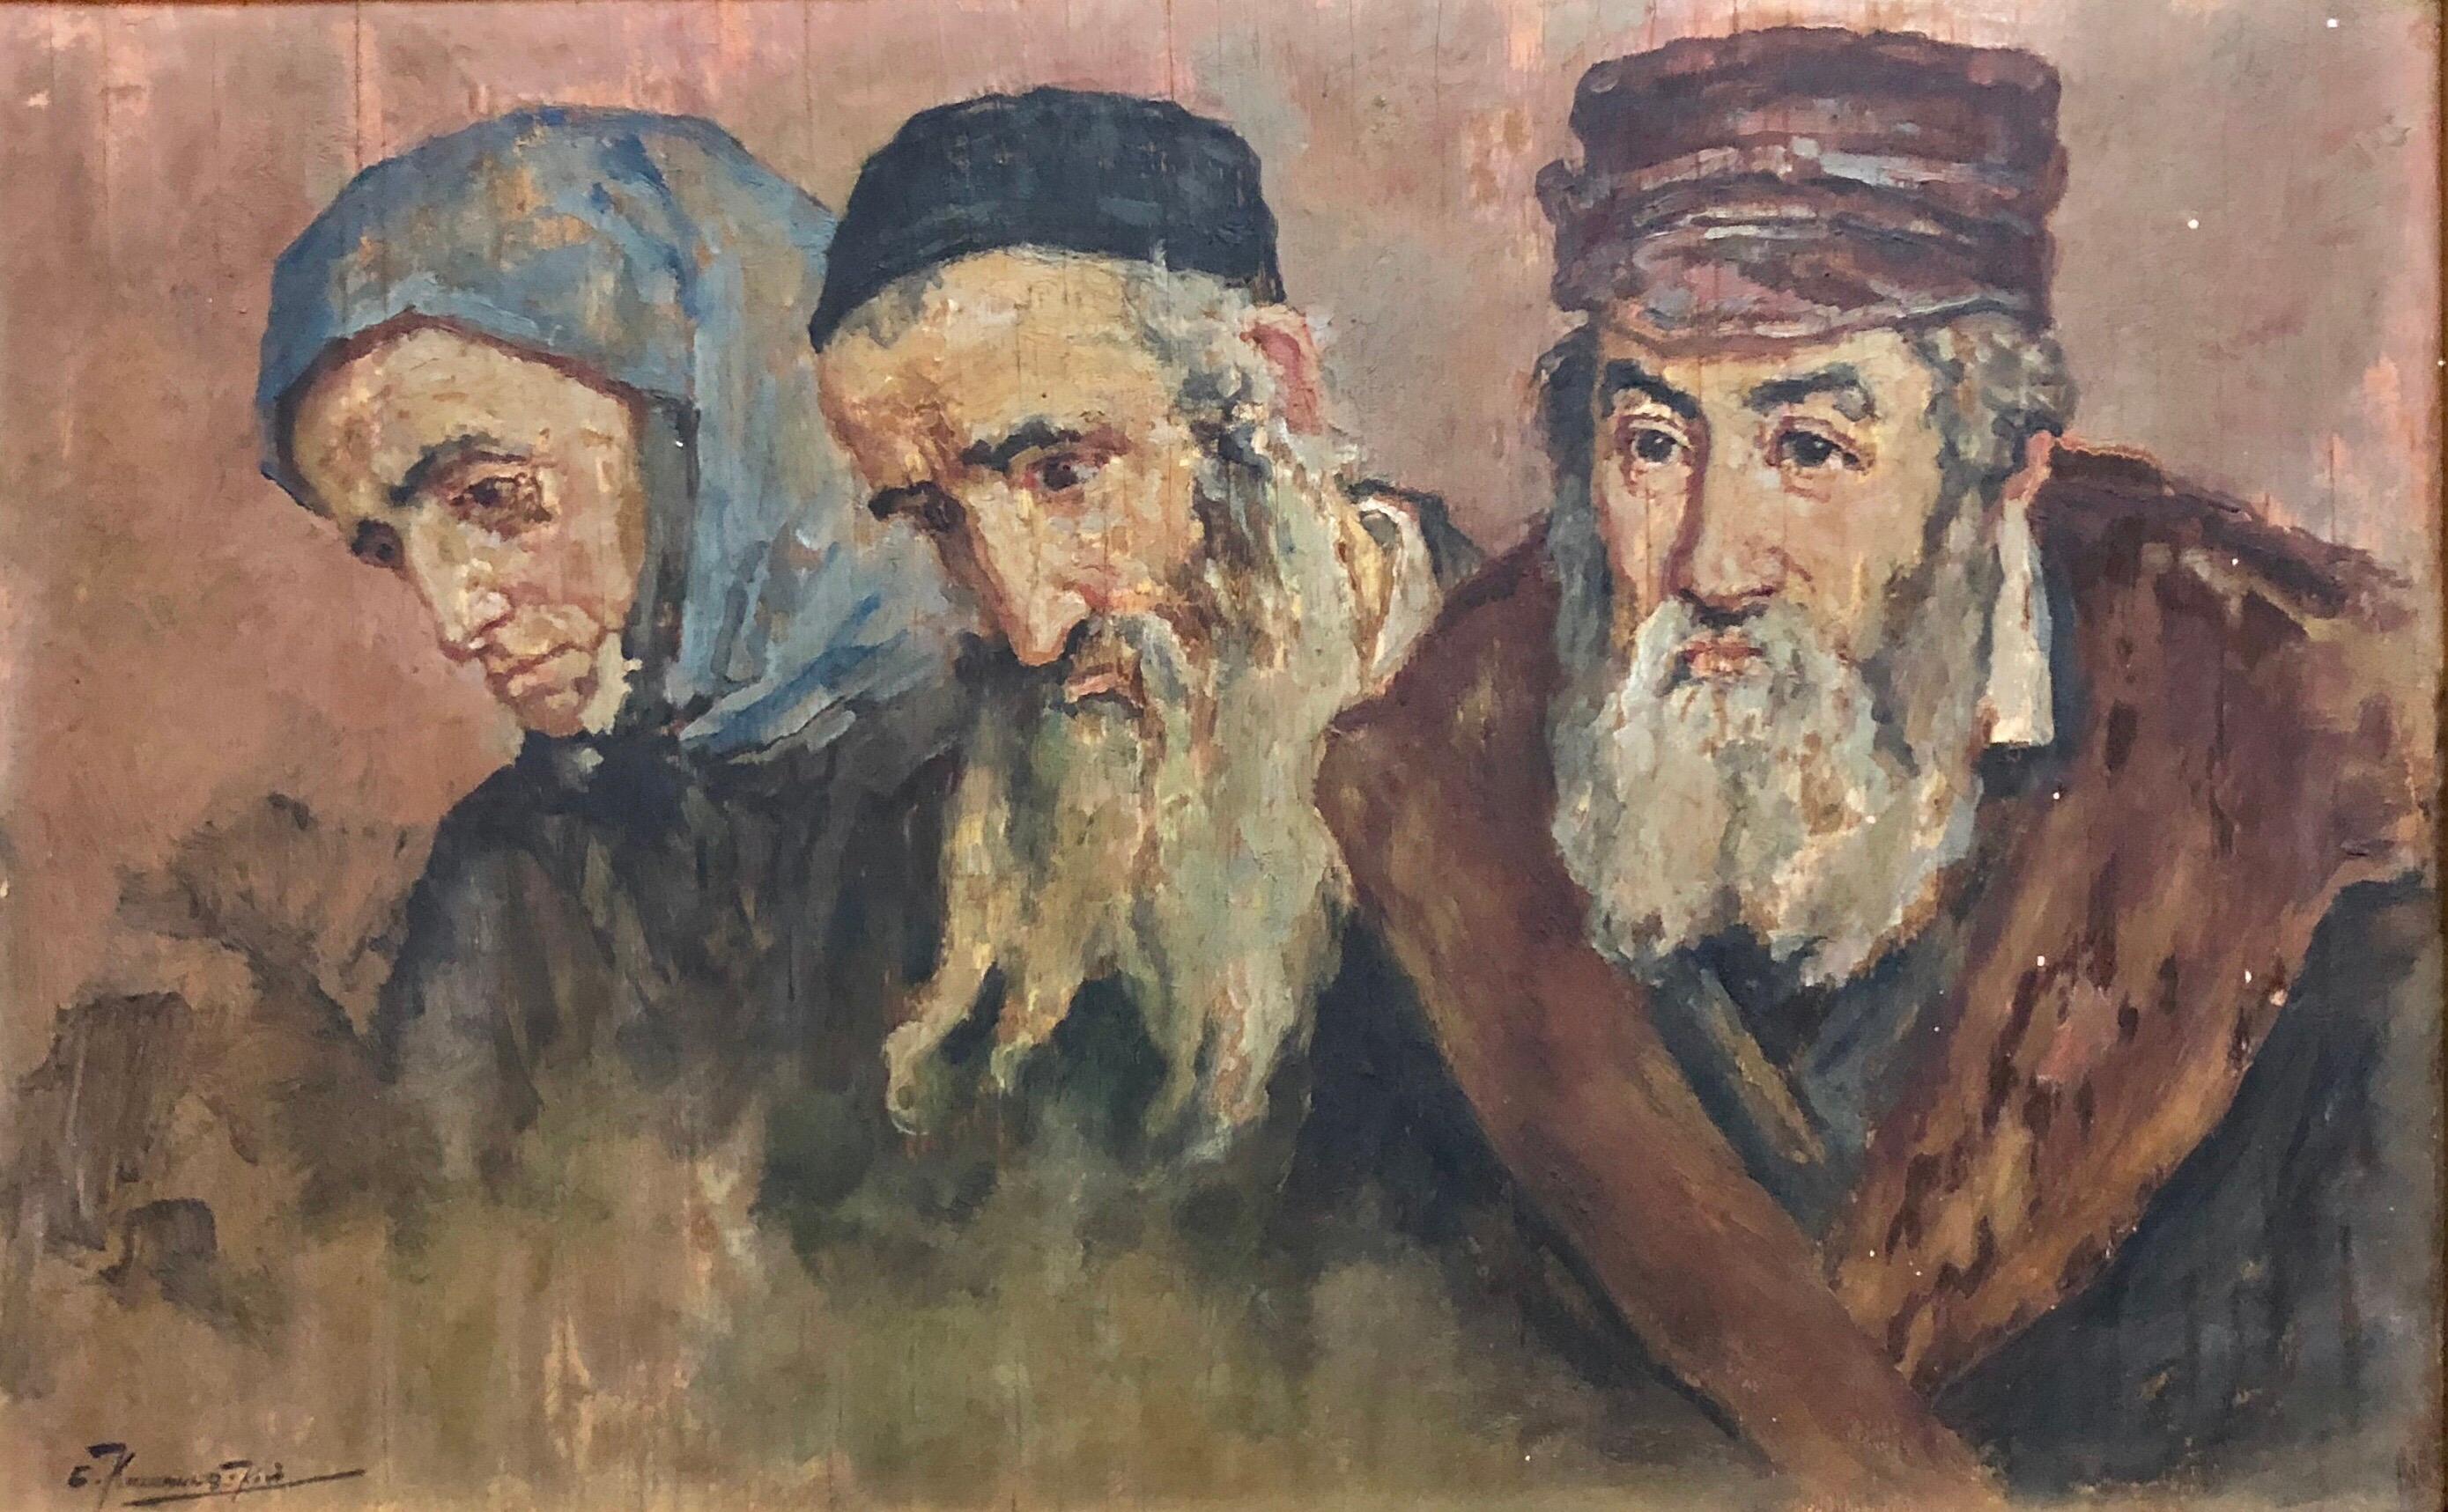 Rare Russian Judaica Oil Painting Jewish Pogrom Refugees Signed in Cyrillic - Brown Portrait Painting by Unknown